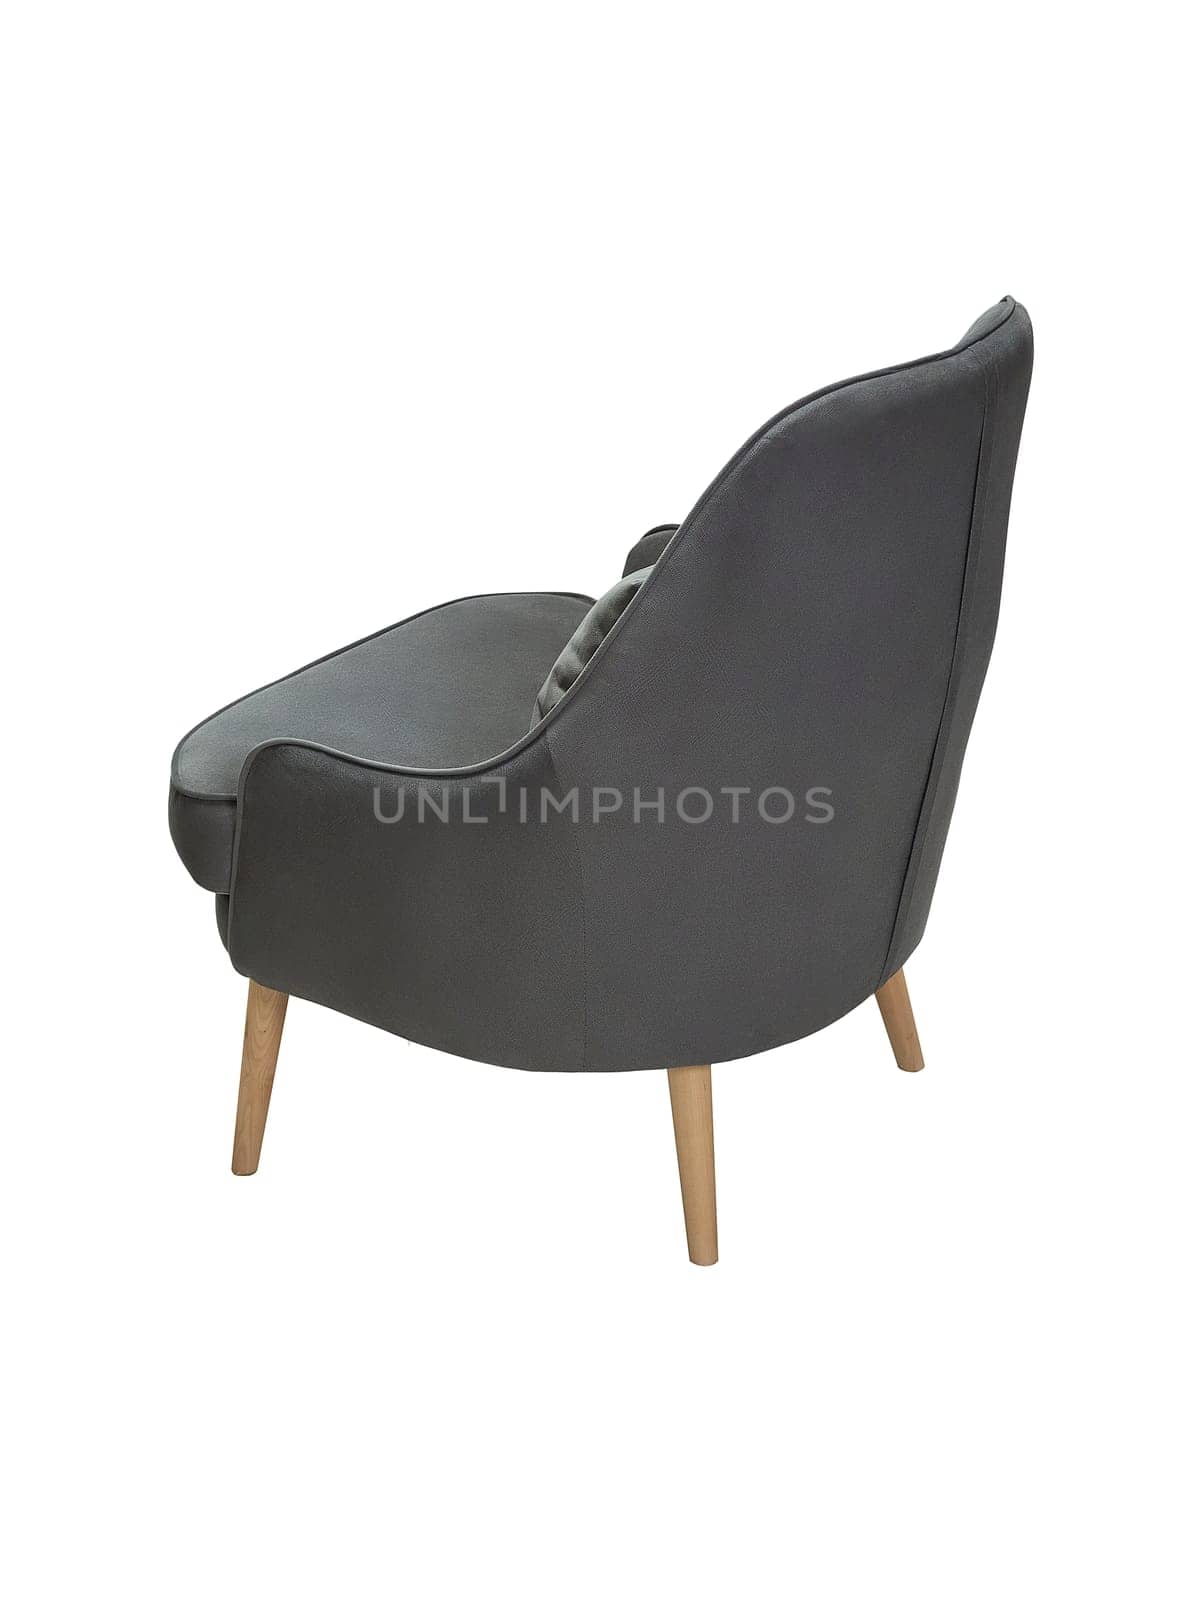 modern gray fabric armchair with wooden legs isolated on white background, back view by artemzatsepilin